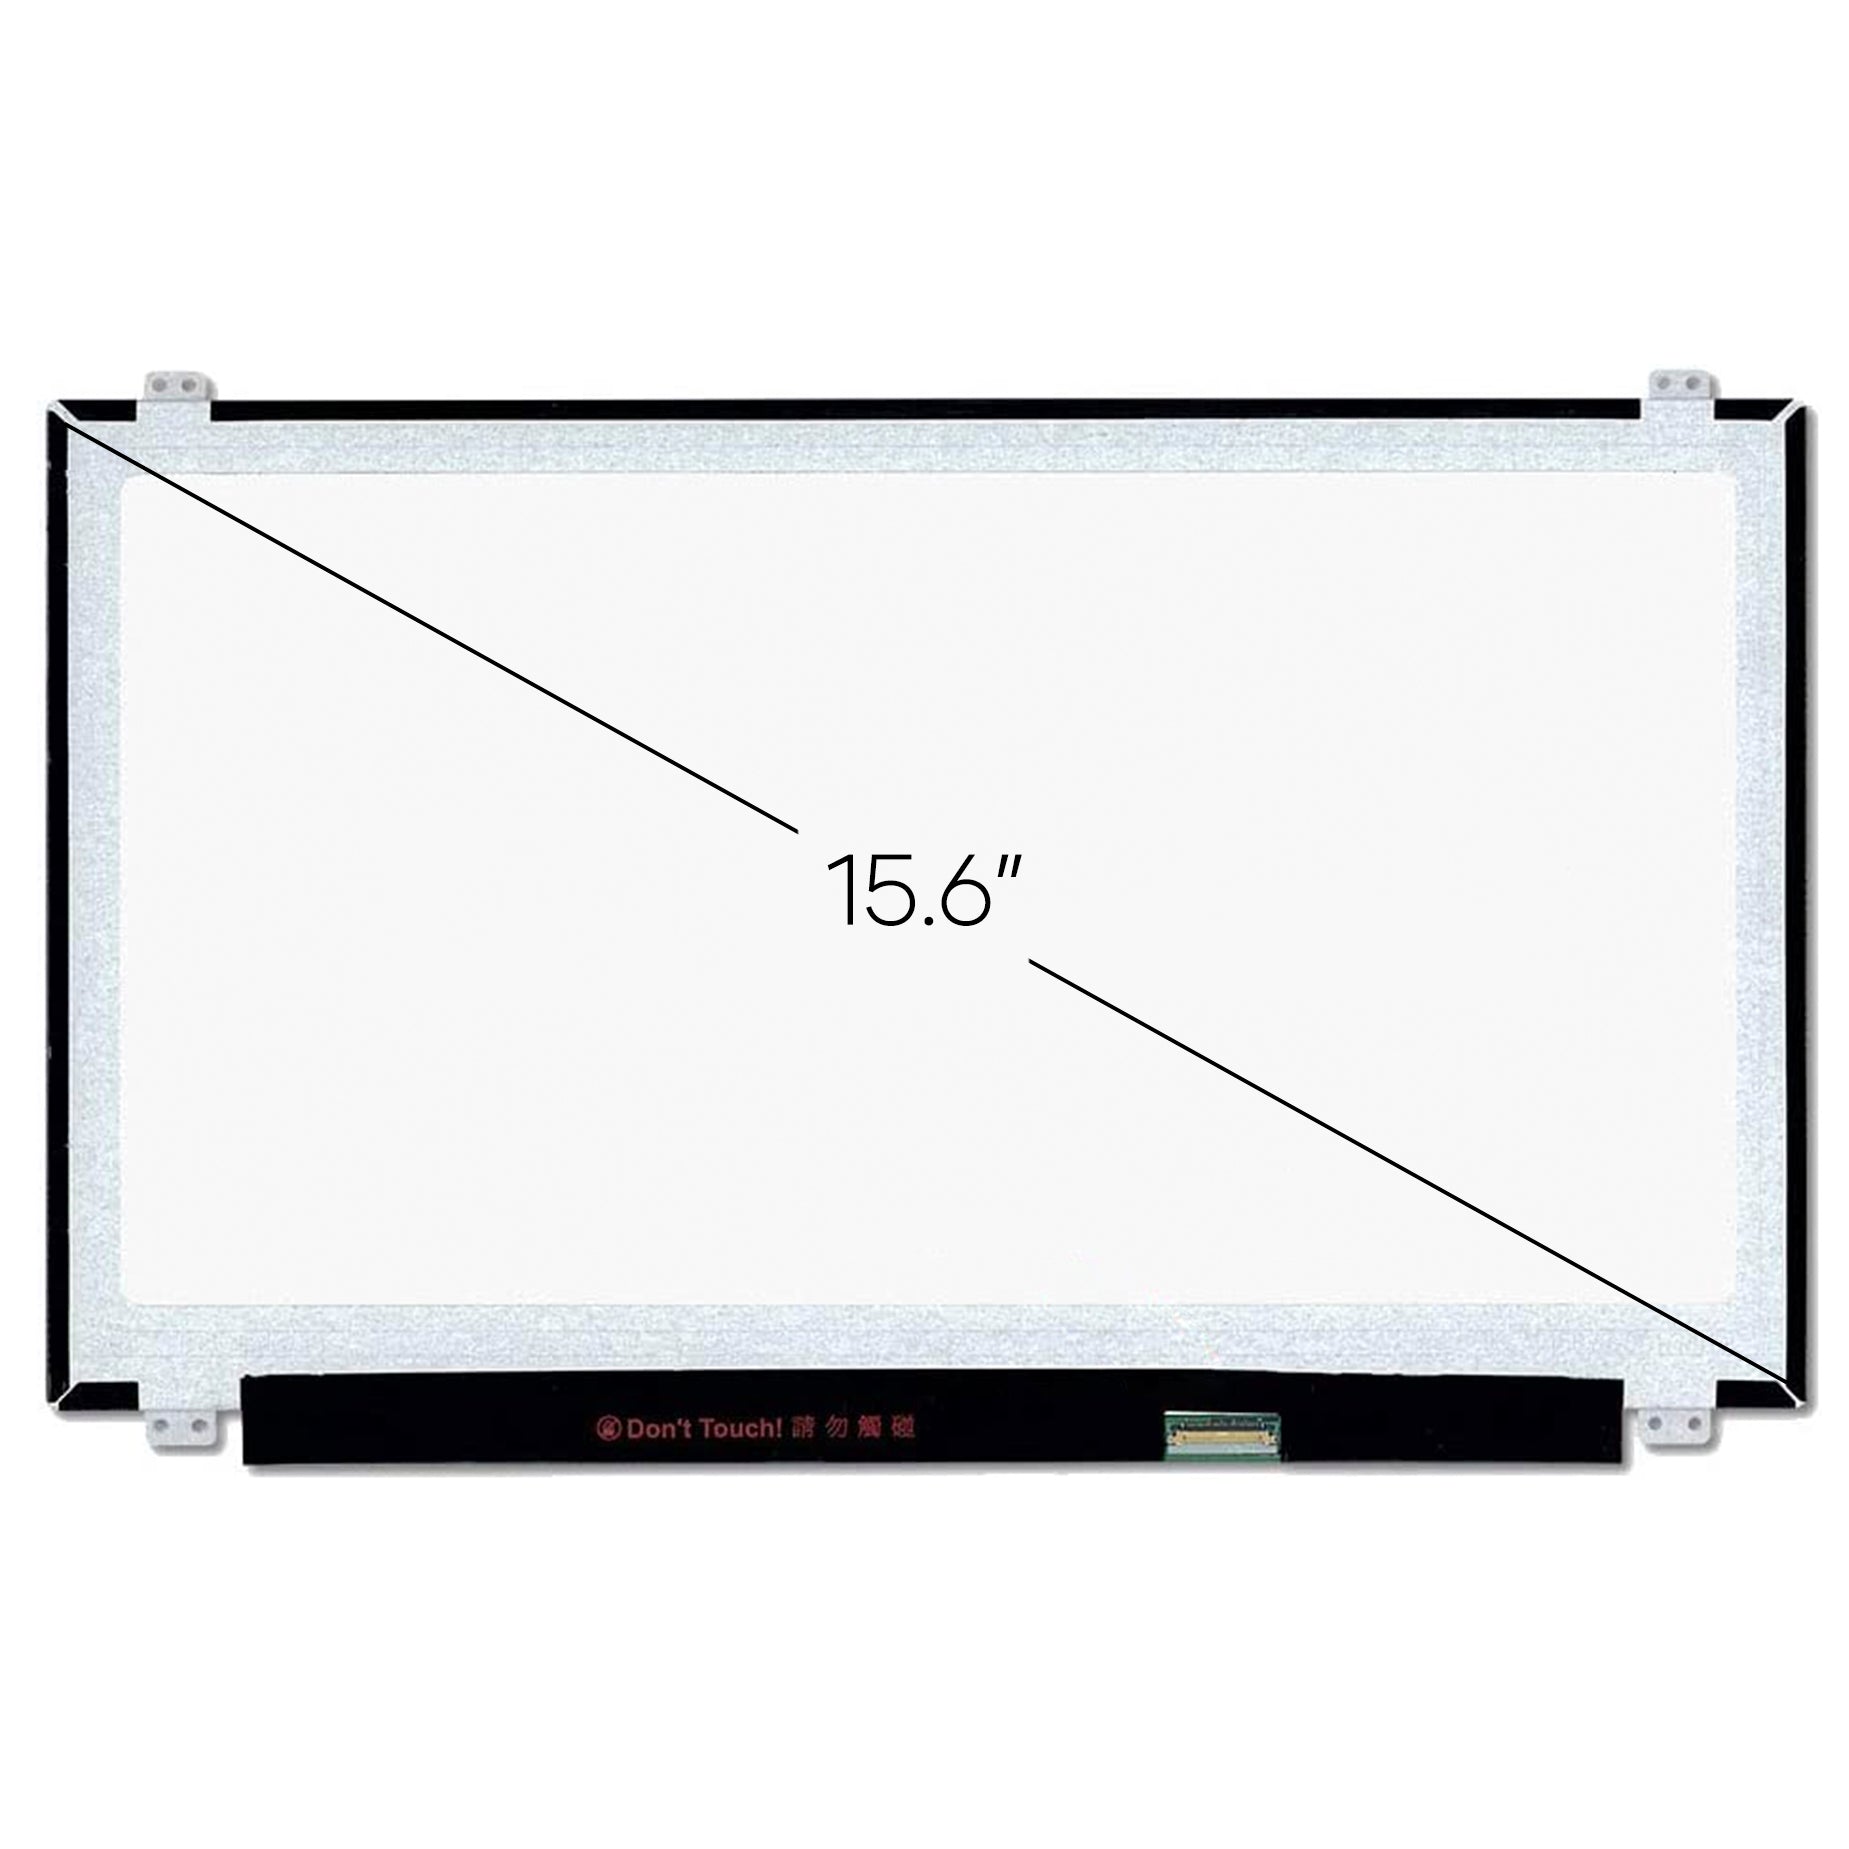 Screen Replacement for B156HTN03.9 FHD 1920x1080 Matte LCD LED Display